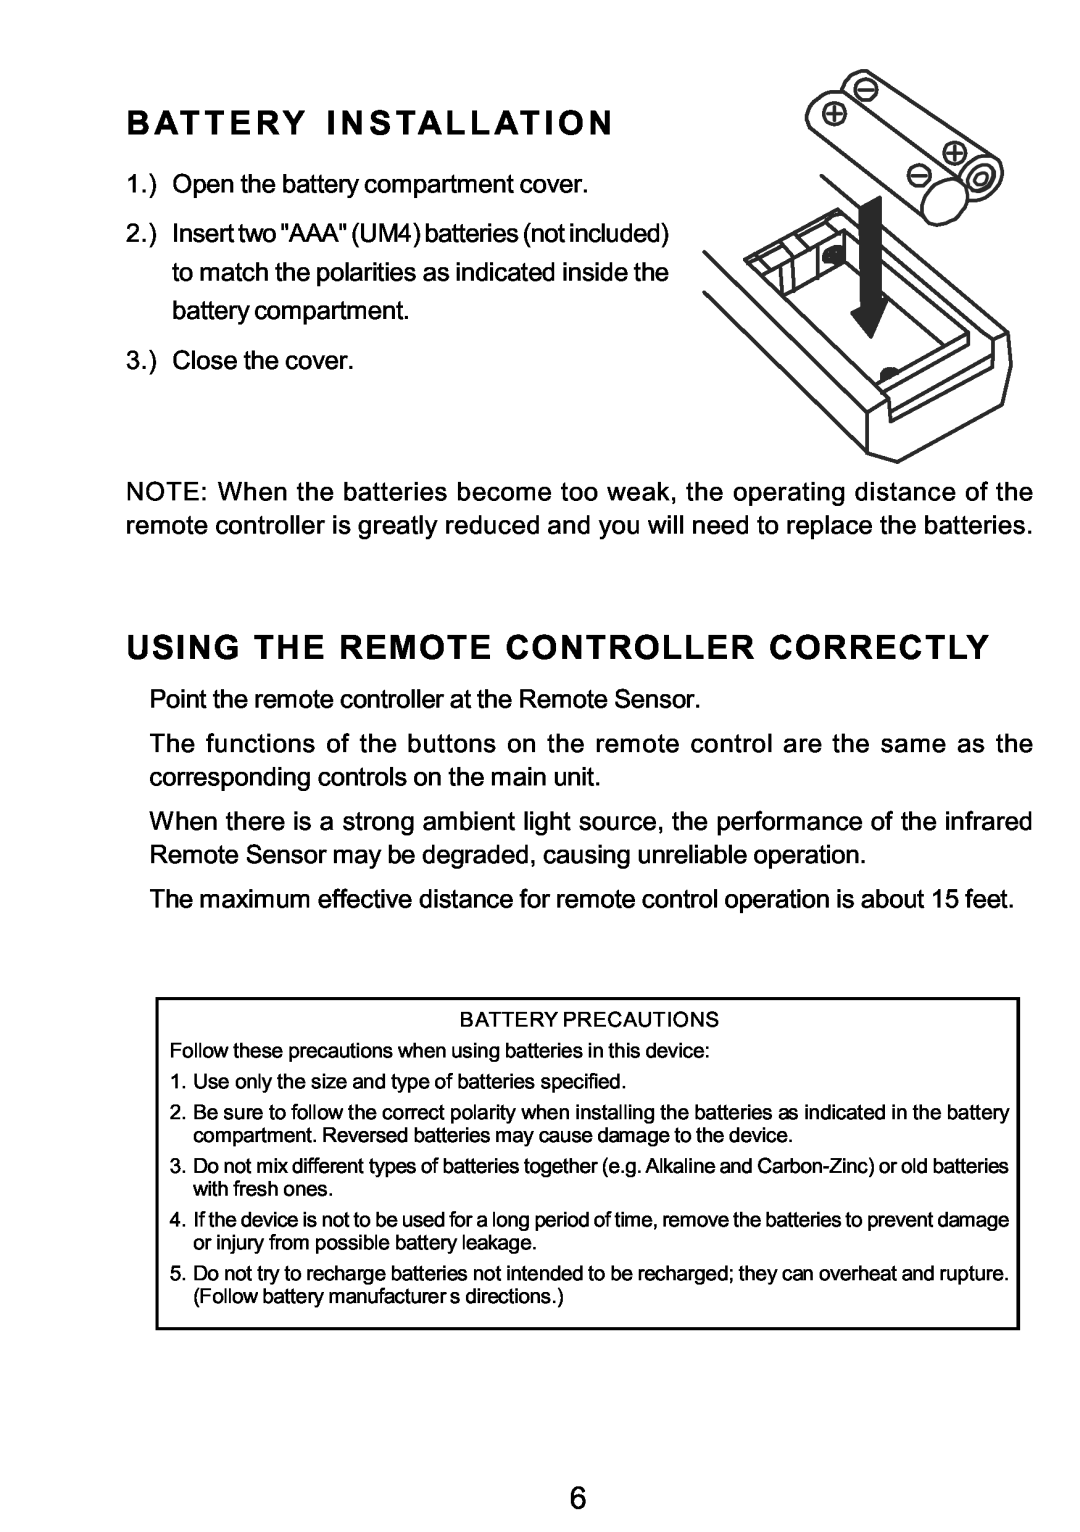 Sylvania SRCD3830 instruction manual B At T E Ry I N S Tal L At I O N, Using The Remote Controller Correctly 